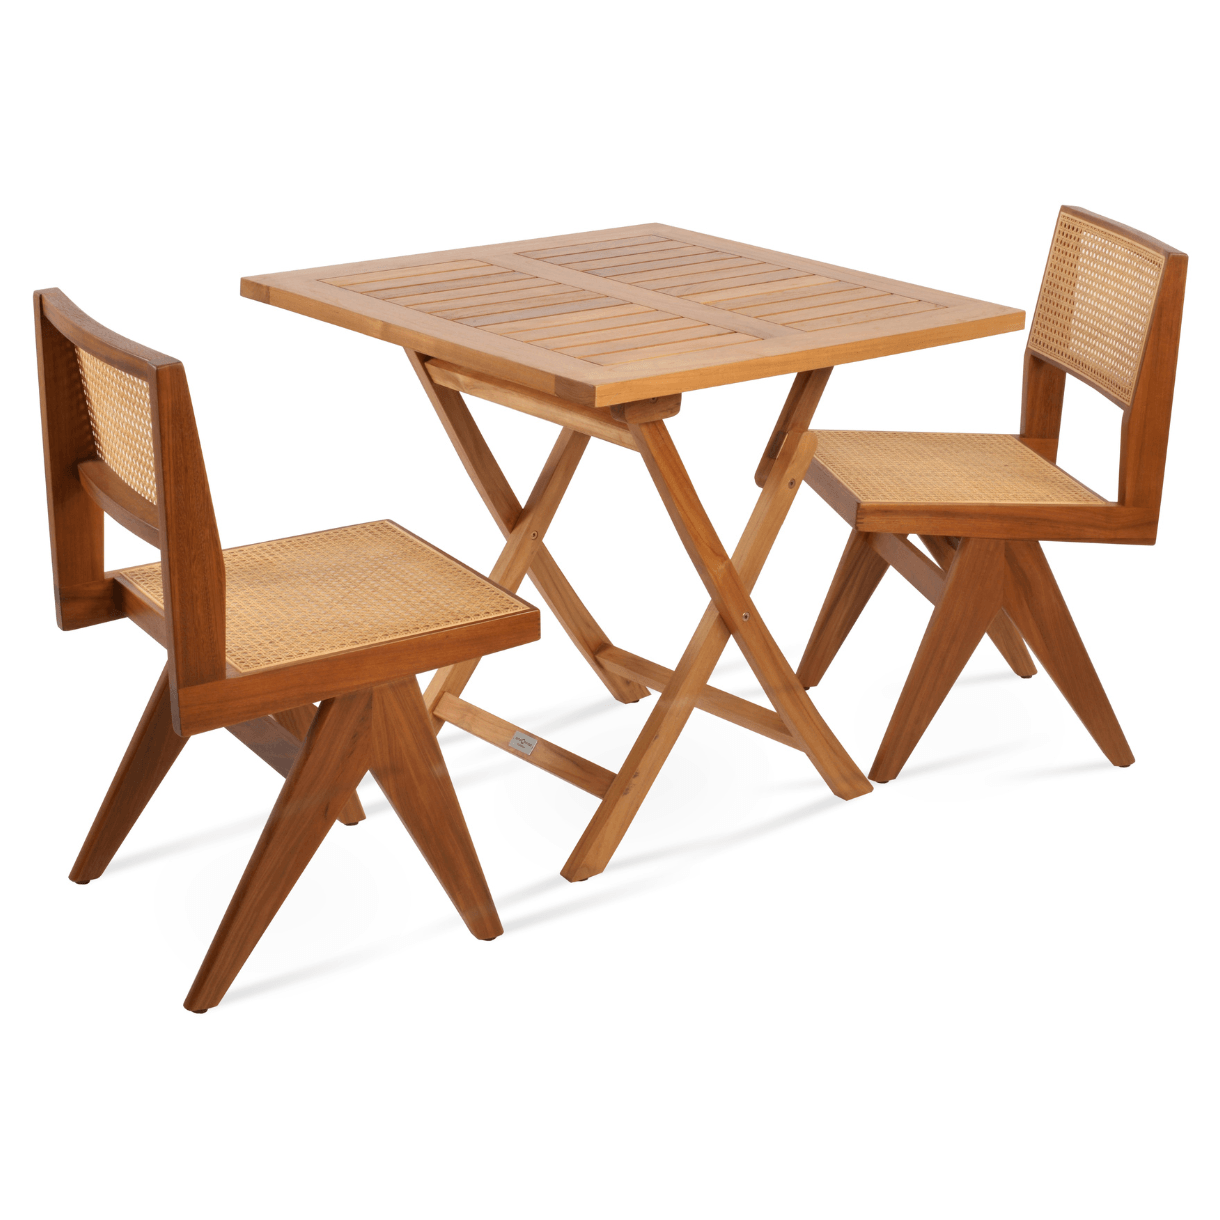 Square Patio Table For 2-4 People Pamela Folding - Your Bar Stools Canada